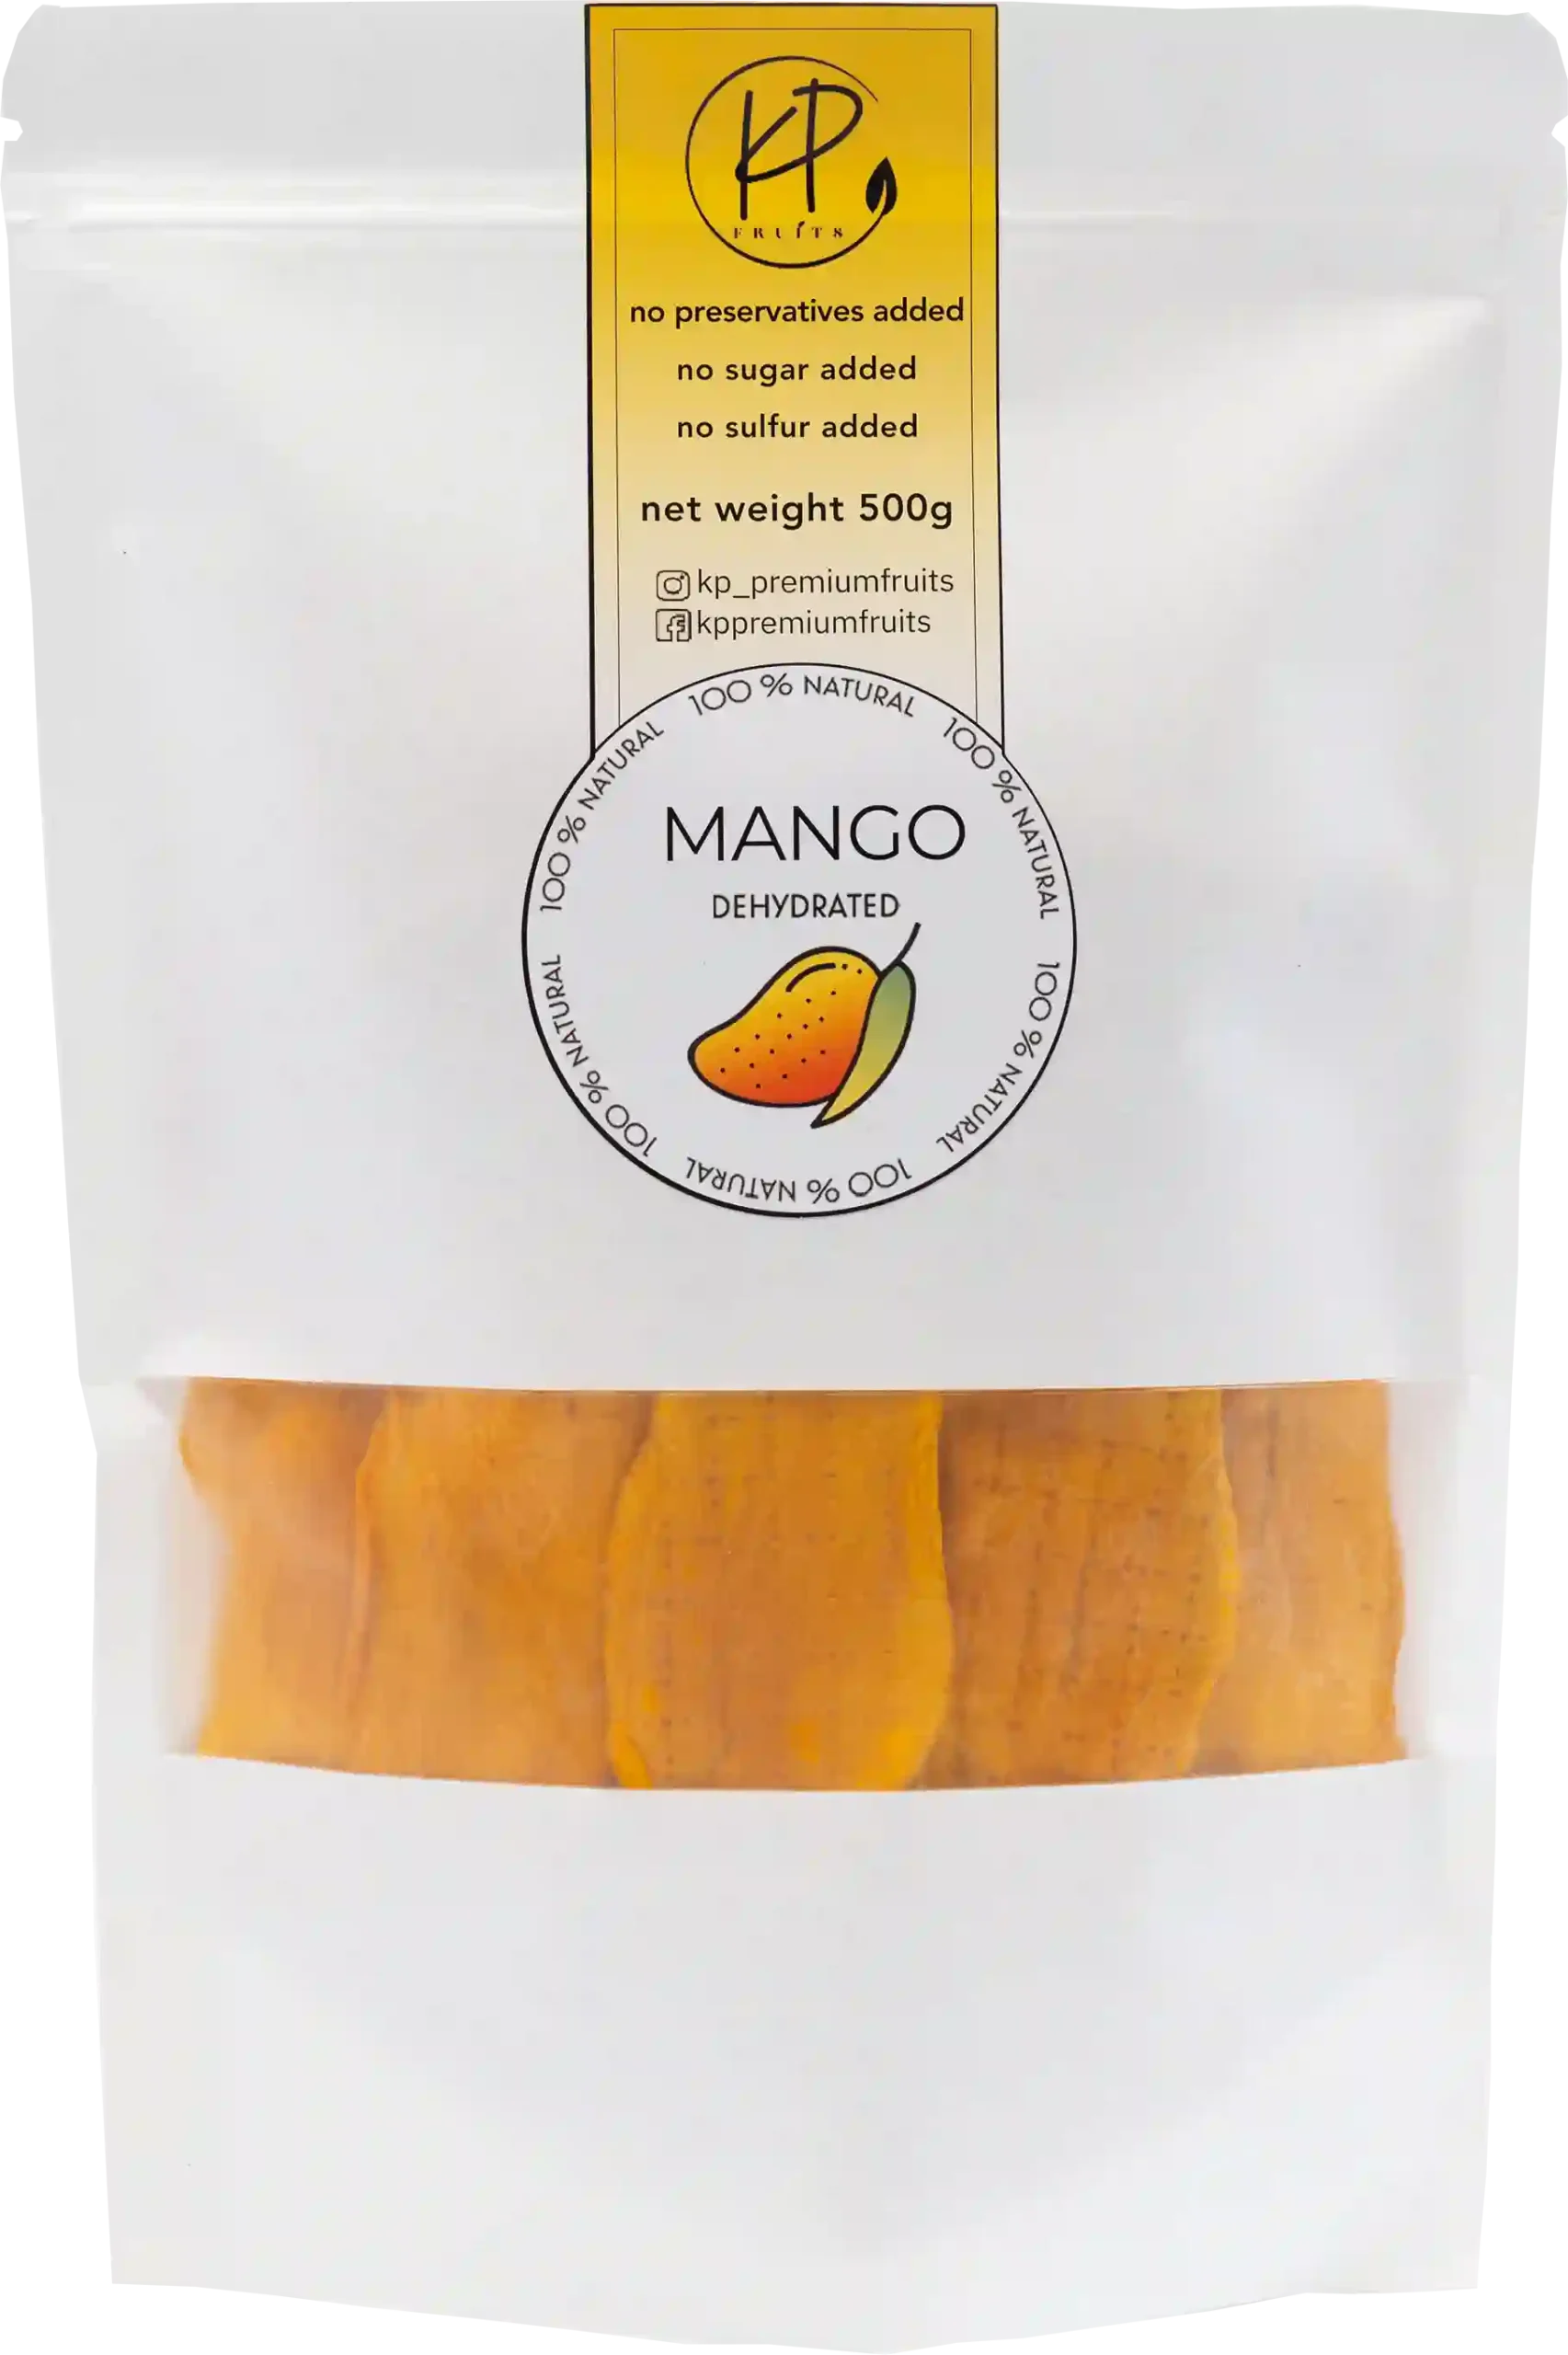 dried mango is a delectable snack that captures the luscious, tropical essence of mango in a convenient, chewy form